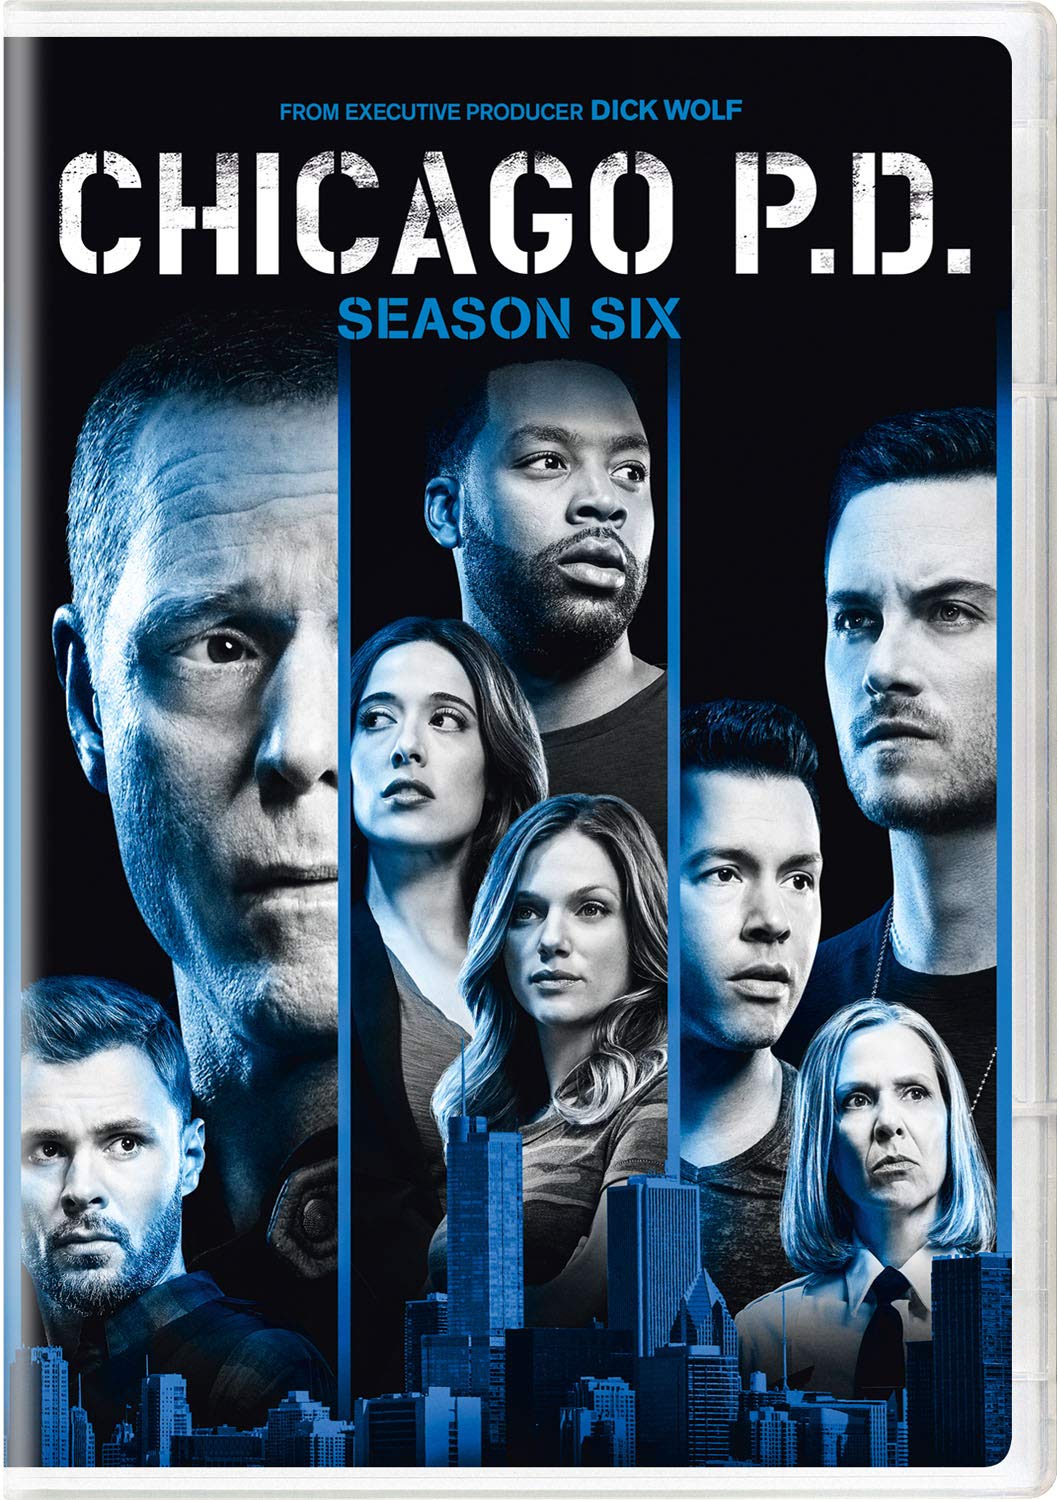 Chicago P.D.: Season Six - DVD   - Drama Television On DVD - TV Shows On GRUV